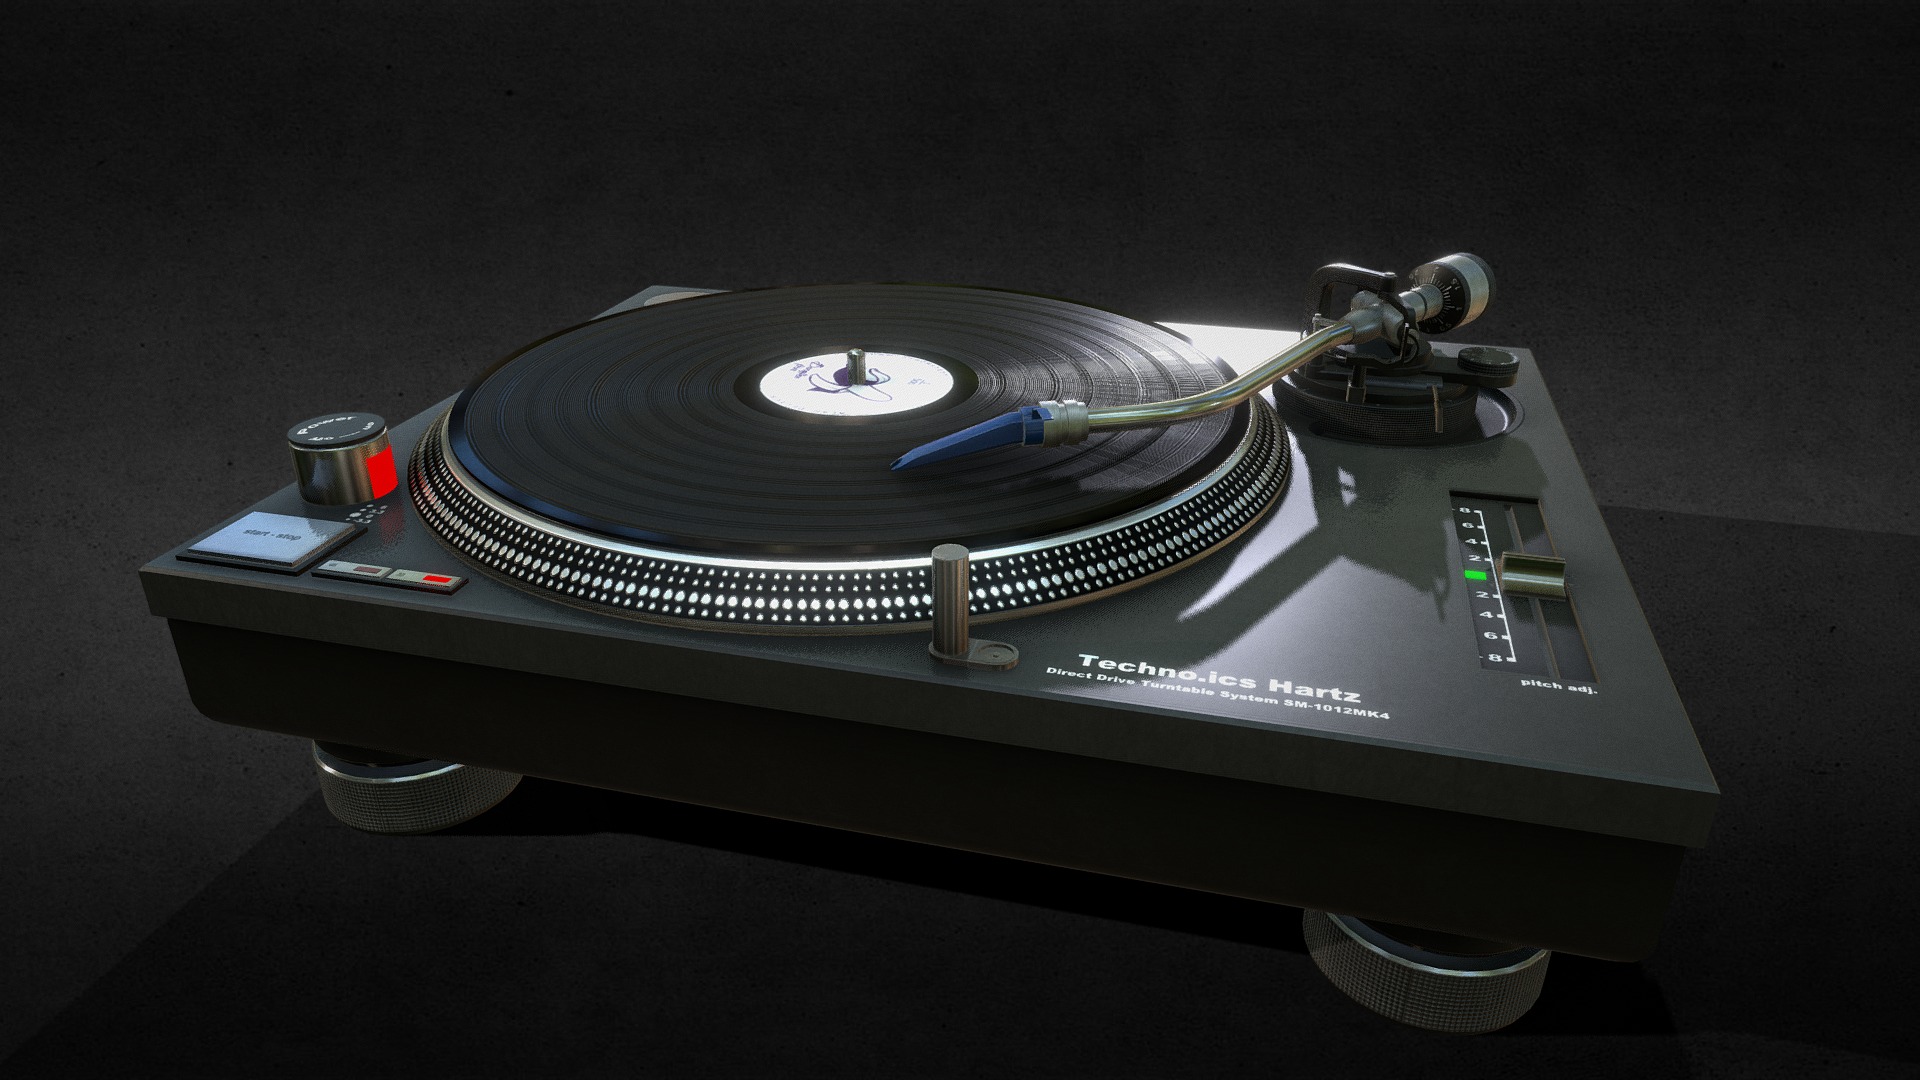 New Version of an Technics Turntable MK2 1210.

Model by: Spaehling

Website: https://www.grip420.com/

Discord: Follow us on Discord

Facebook Follow us on Facebook - MK2 1210 Turntable - 3D model by GRIP420 3d model